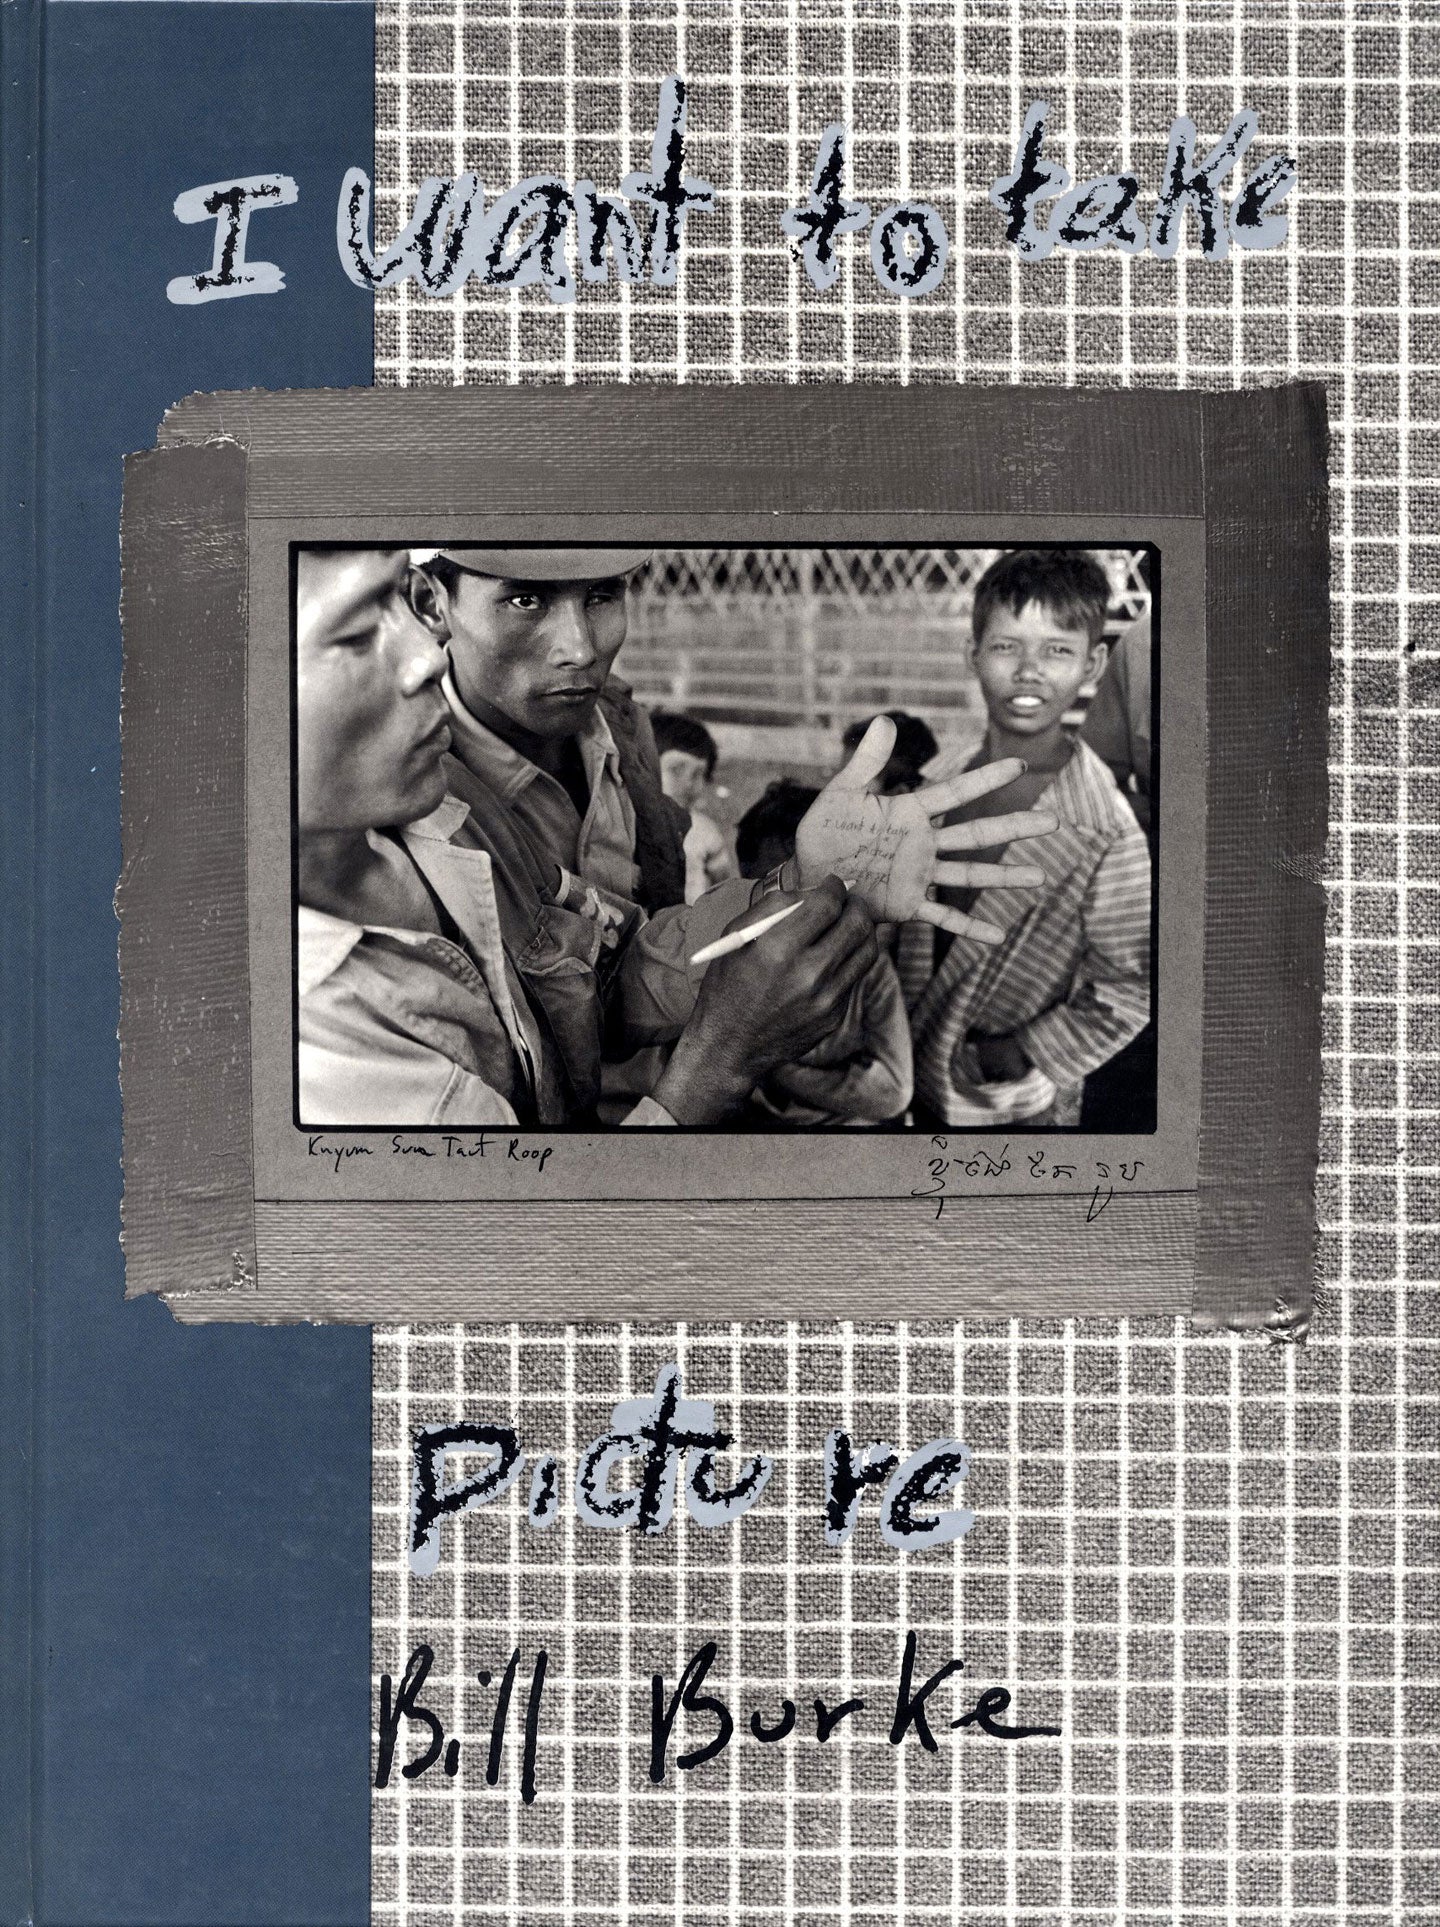 Bill Burke: I Want to Take Picture (First Edition)